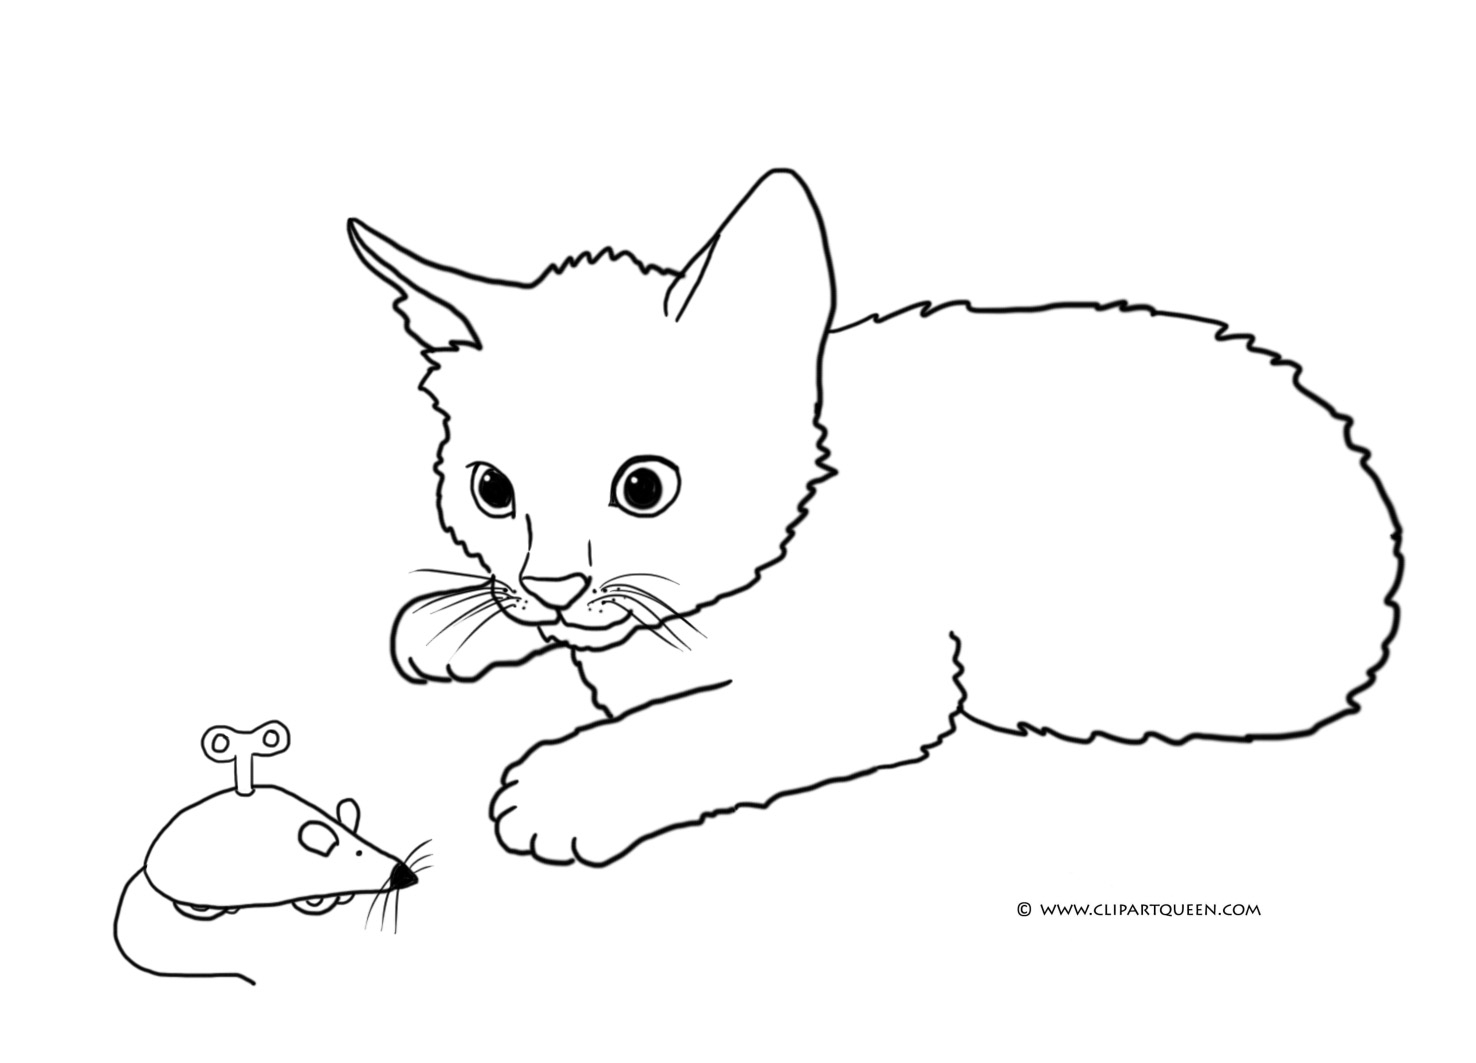 Coloring page dazzling cat and mouse